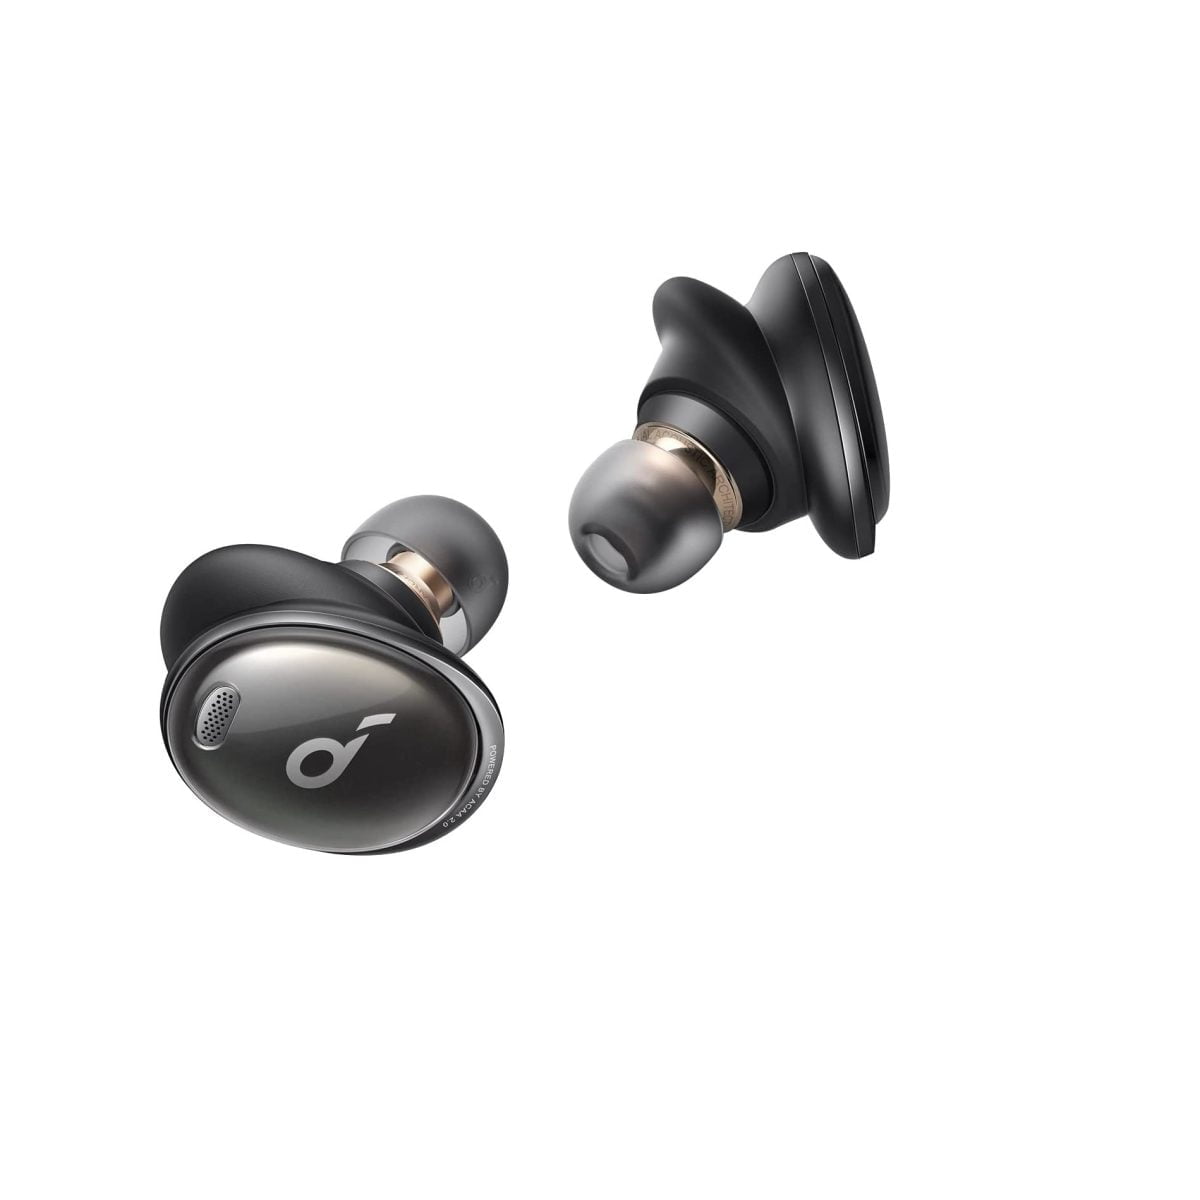 51467Shjgl. Ac Sl1500 Soundcore &Lt;H1 Id=&Quot;Title&Quot; Class=&Quot;A-Size-Large A-Spacing-None&Quot;&Gt;Anker Soundcore Liberty Air 3 Pro True Wireless Earbuds - Black&Lt;/H1&Gt; Https://Www.youtube.com/Watch?V=Bguj4K07Ruy &Lt;Ul&Gt; &Lt;Li&Gt;&Lt;B&Gt;Acaa 2.0:  &Lt;/B&Gt;Our Exclusive Coaxial Dual Driver Technology Delivers High And Low Frequency Sound Directly To Your Ear Without Interference. Its Wide Soundstage Is Detailed And Spacious, Bass Has A Deep Punch, Mids Are Luscious, And Treble Sparkles.&Lt;/Li&Gt; &Lt;Li&Gt;&Lt;B&Gt;Personalized Noise Cancelling:  &Lt;/B&Gt;Standard Noise Cancelling Only Adjusts Noise Based On Data. Hearid Anc Analyzes Your Ears And Level Of In-Ear Pressure To Create A Tailored Profile That Optimizes Noise Reduction And Reduces External Sound To Suit Your Ears.&Lt;/Li&Gt; &Lt;Li&Gt;&Lt;B&Gt;Fusion Comfort Fit:  &Lt;/B&Gt;Liberty 3 Pro’s Earbuds Have A Triple-Point Ergonomic Shape And Built-In Ear Pressure Relief For All-Day Comfort. 4 Sizes Of Liquid Silicone Ear Tips And Flexible Ear Wings Ensure You Get A Strong Seal And Secure Grip.&Lt;/Li&Gt; &Lt;Li&Gt;&Lt;B&Gt;Up To 32 Hours Of Playtime:  &Lt;/B&Gt;Enjoy Up To 8 Hours Of Music From A Single Charge, Plus Get 3 Full Charges From The Compact Charging Case To Extend The Playtime Even Further. Recharge The Case Via Usb-C Cable Or Wireless Charger.&Lt;/Li&Gt; &Lt;/Ul&Gt; &Lt;H5&Gt;Warranty: Anker Product Warranty&Lt;/H5&Gt; &Lt;Pre&Gt;&Lt;B&Gt;We Also Provide International Wholesale And Retail Shipping To All Gcc Countries: Saudi Arabia, Qatar, Oman, Kuwait, Bahrain.&Lt;/B&Gt;&Lt;/Pre&Gt; Earbuds Anker Soundcore Liberty Air 3 Pro True Wireless Earbuds - Black A3952011